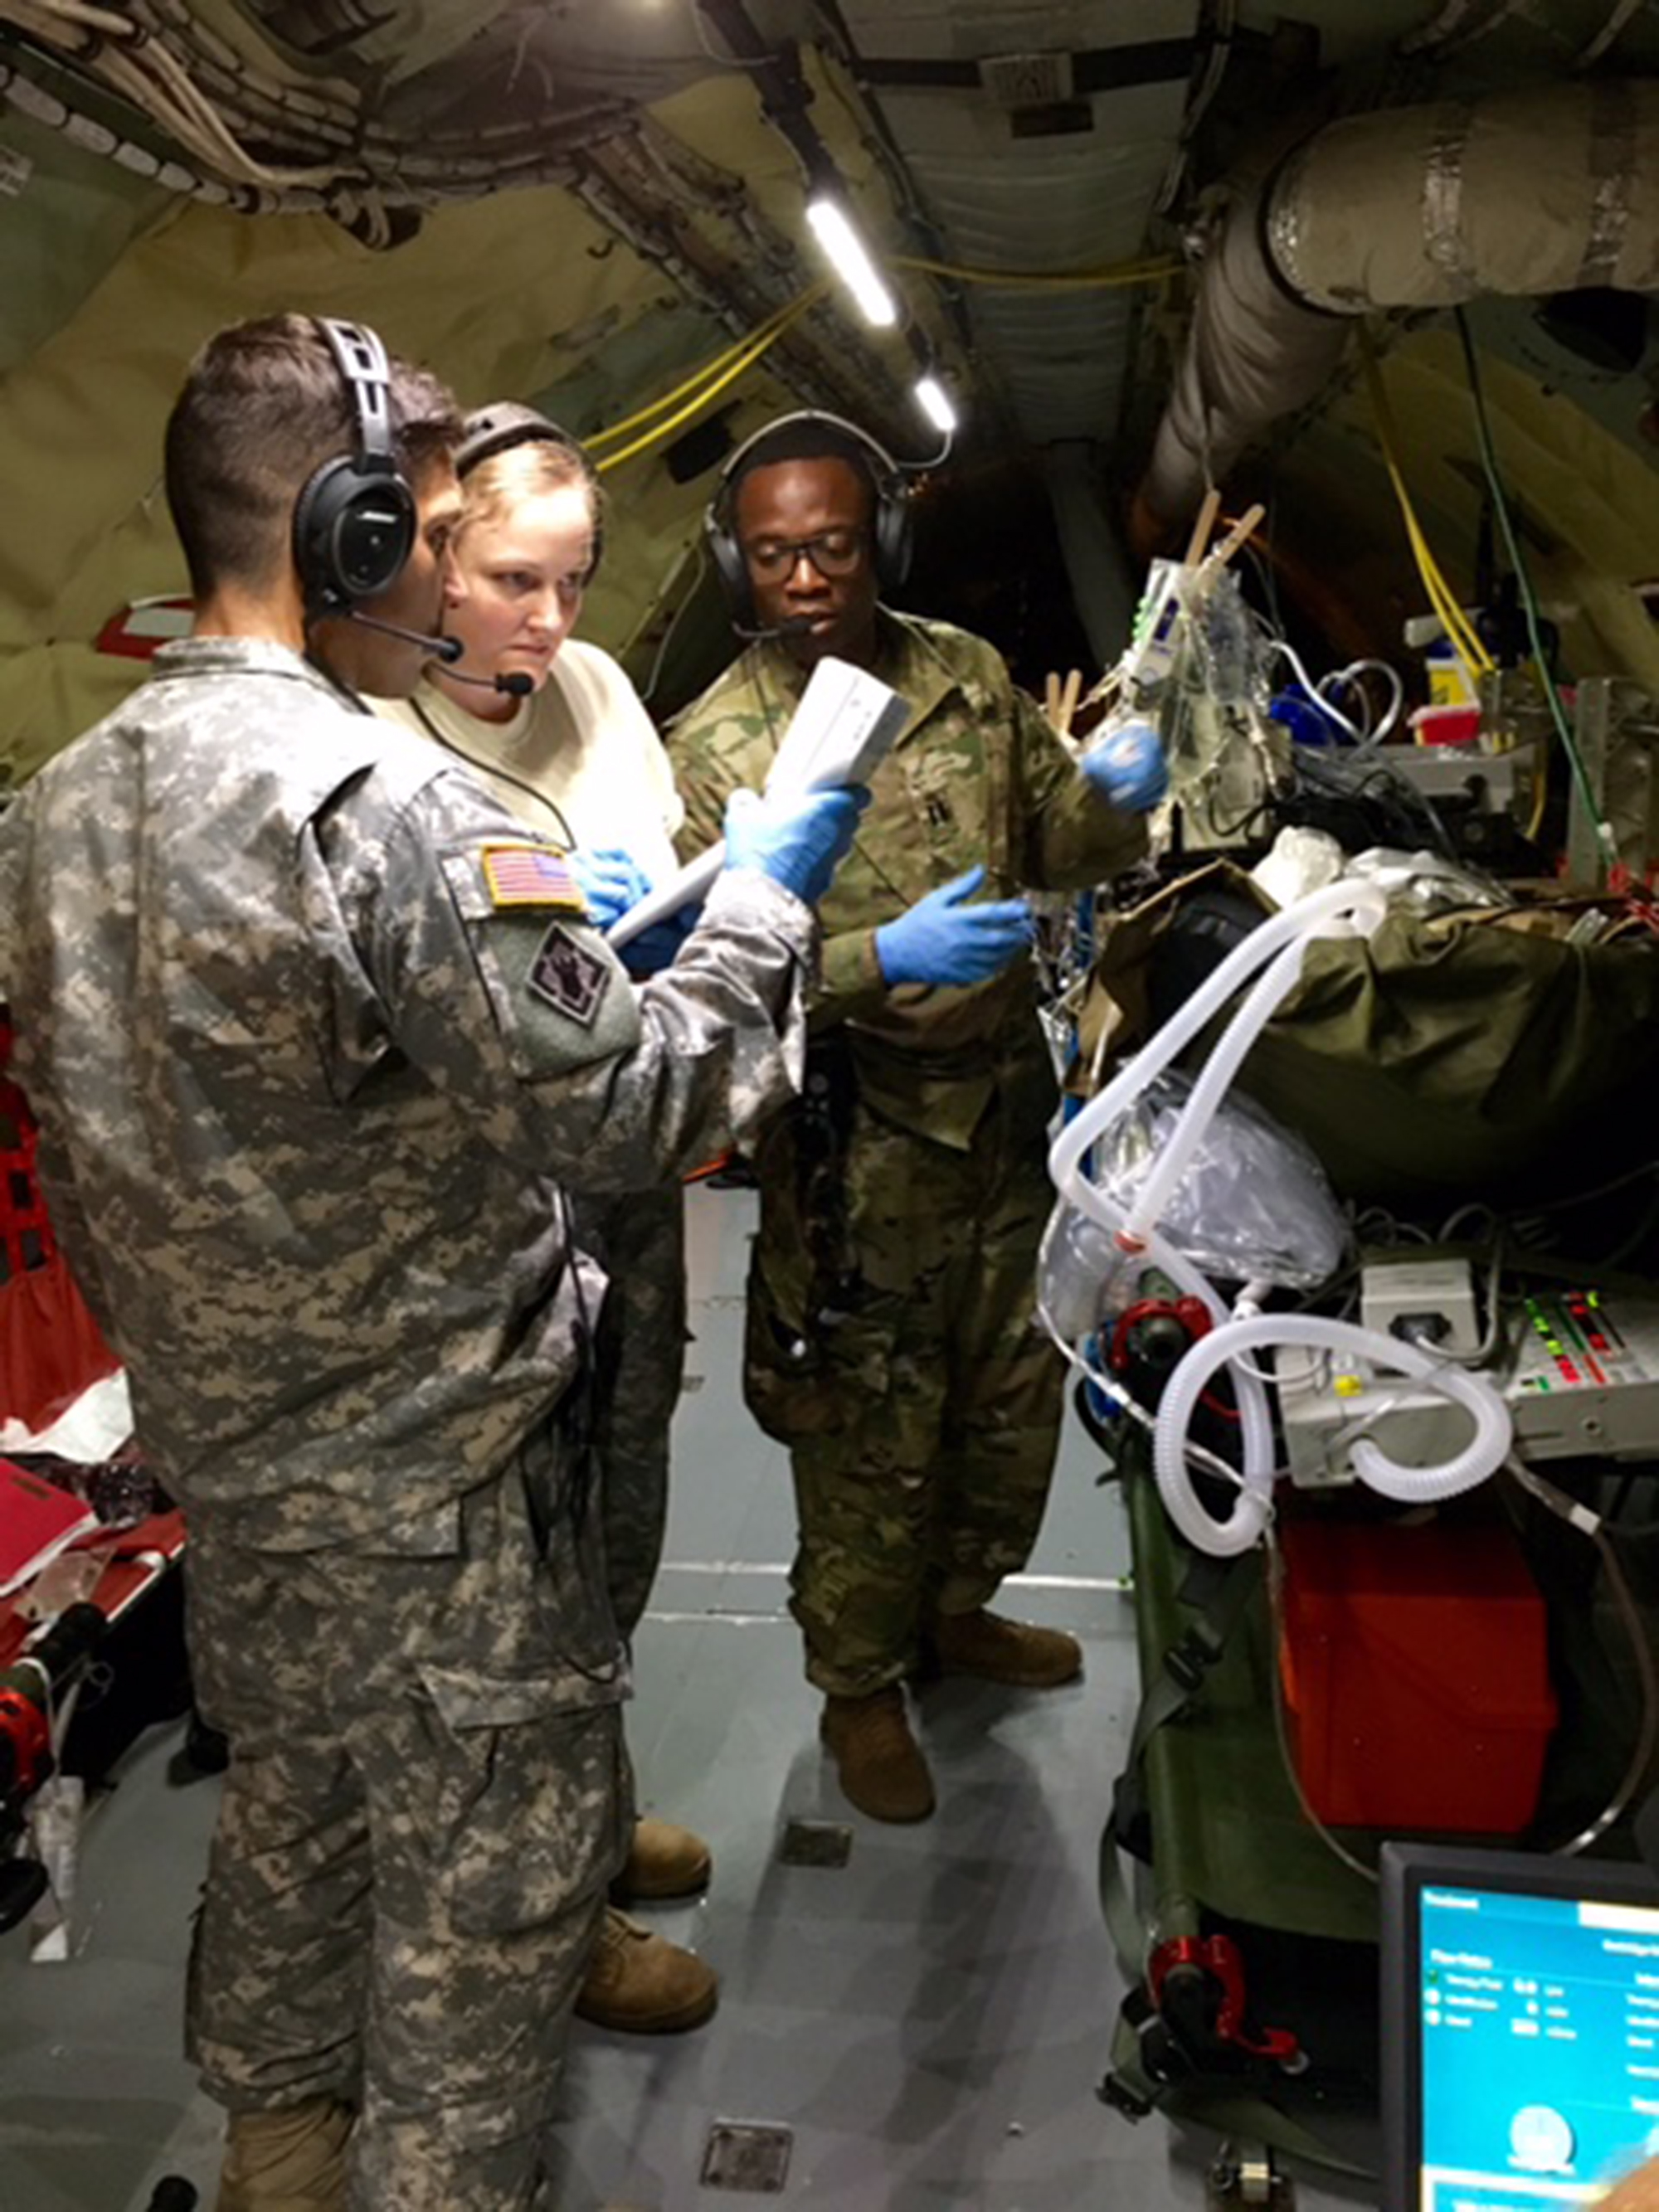 U.S. Army Institute of Surgical Research Burn Flight Team members Staff Sgt. Daniel Zimmerman, Capt. Sarah Hensley and Capt. Kirt Cline monitor a patient during a record-breaking mission from Singapore on Nov. 9, 2015. (U.S. Army photo courtesy of USAISR)